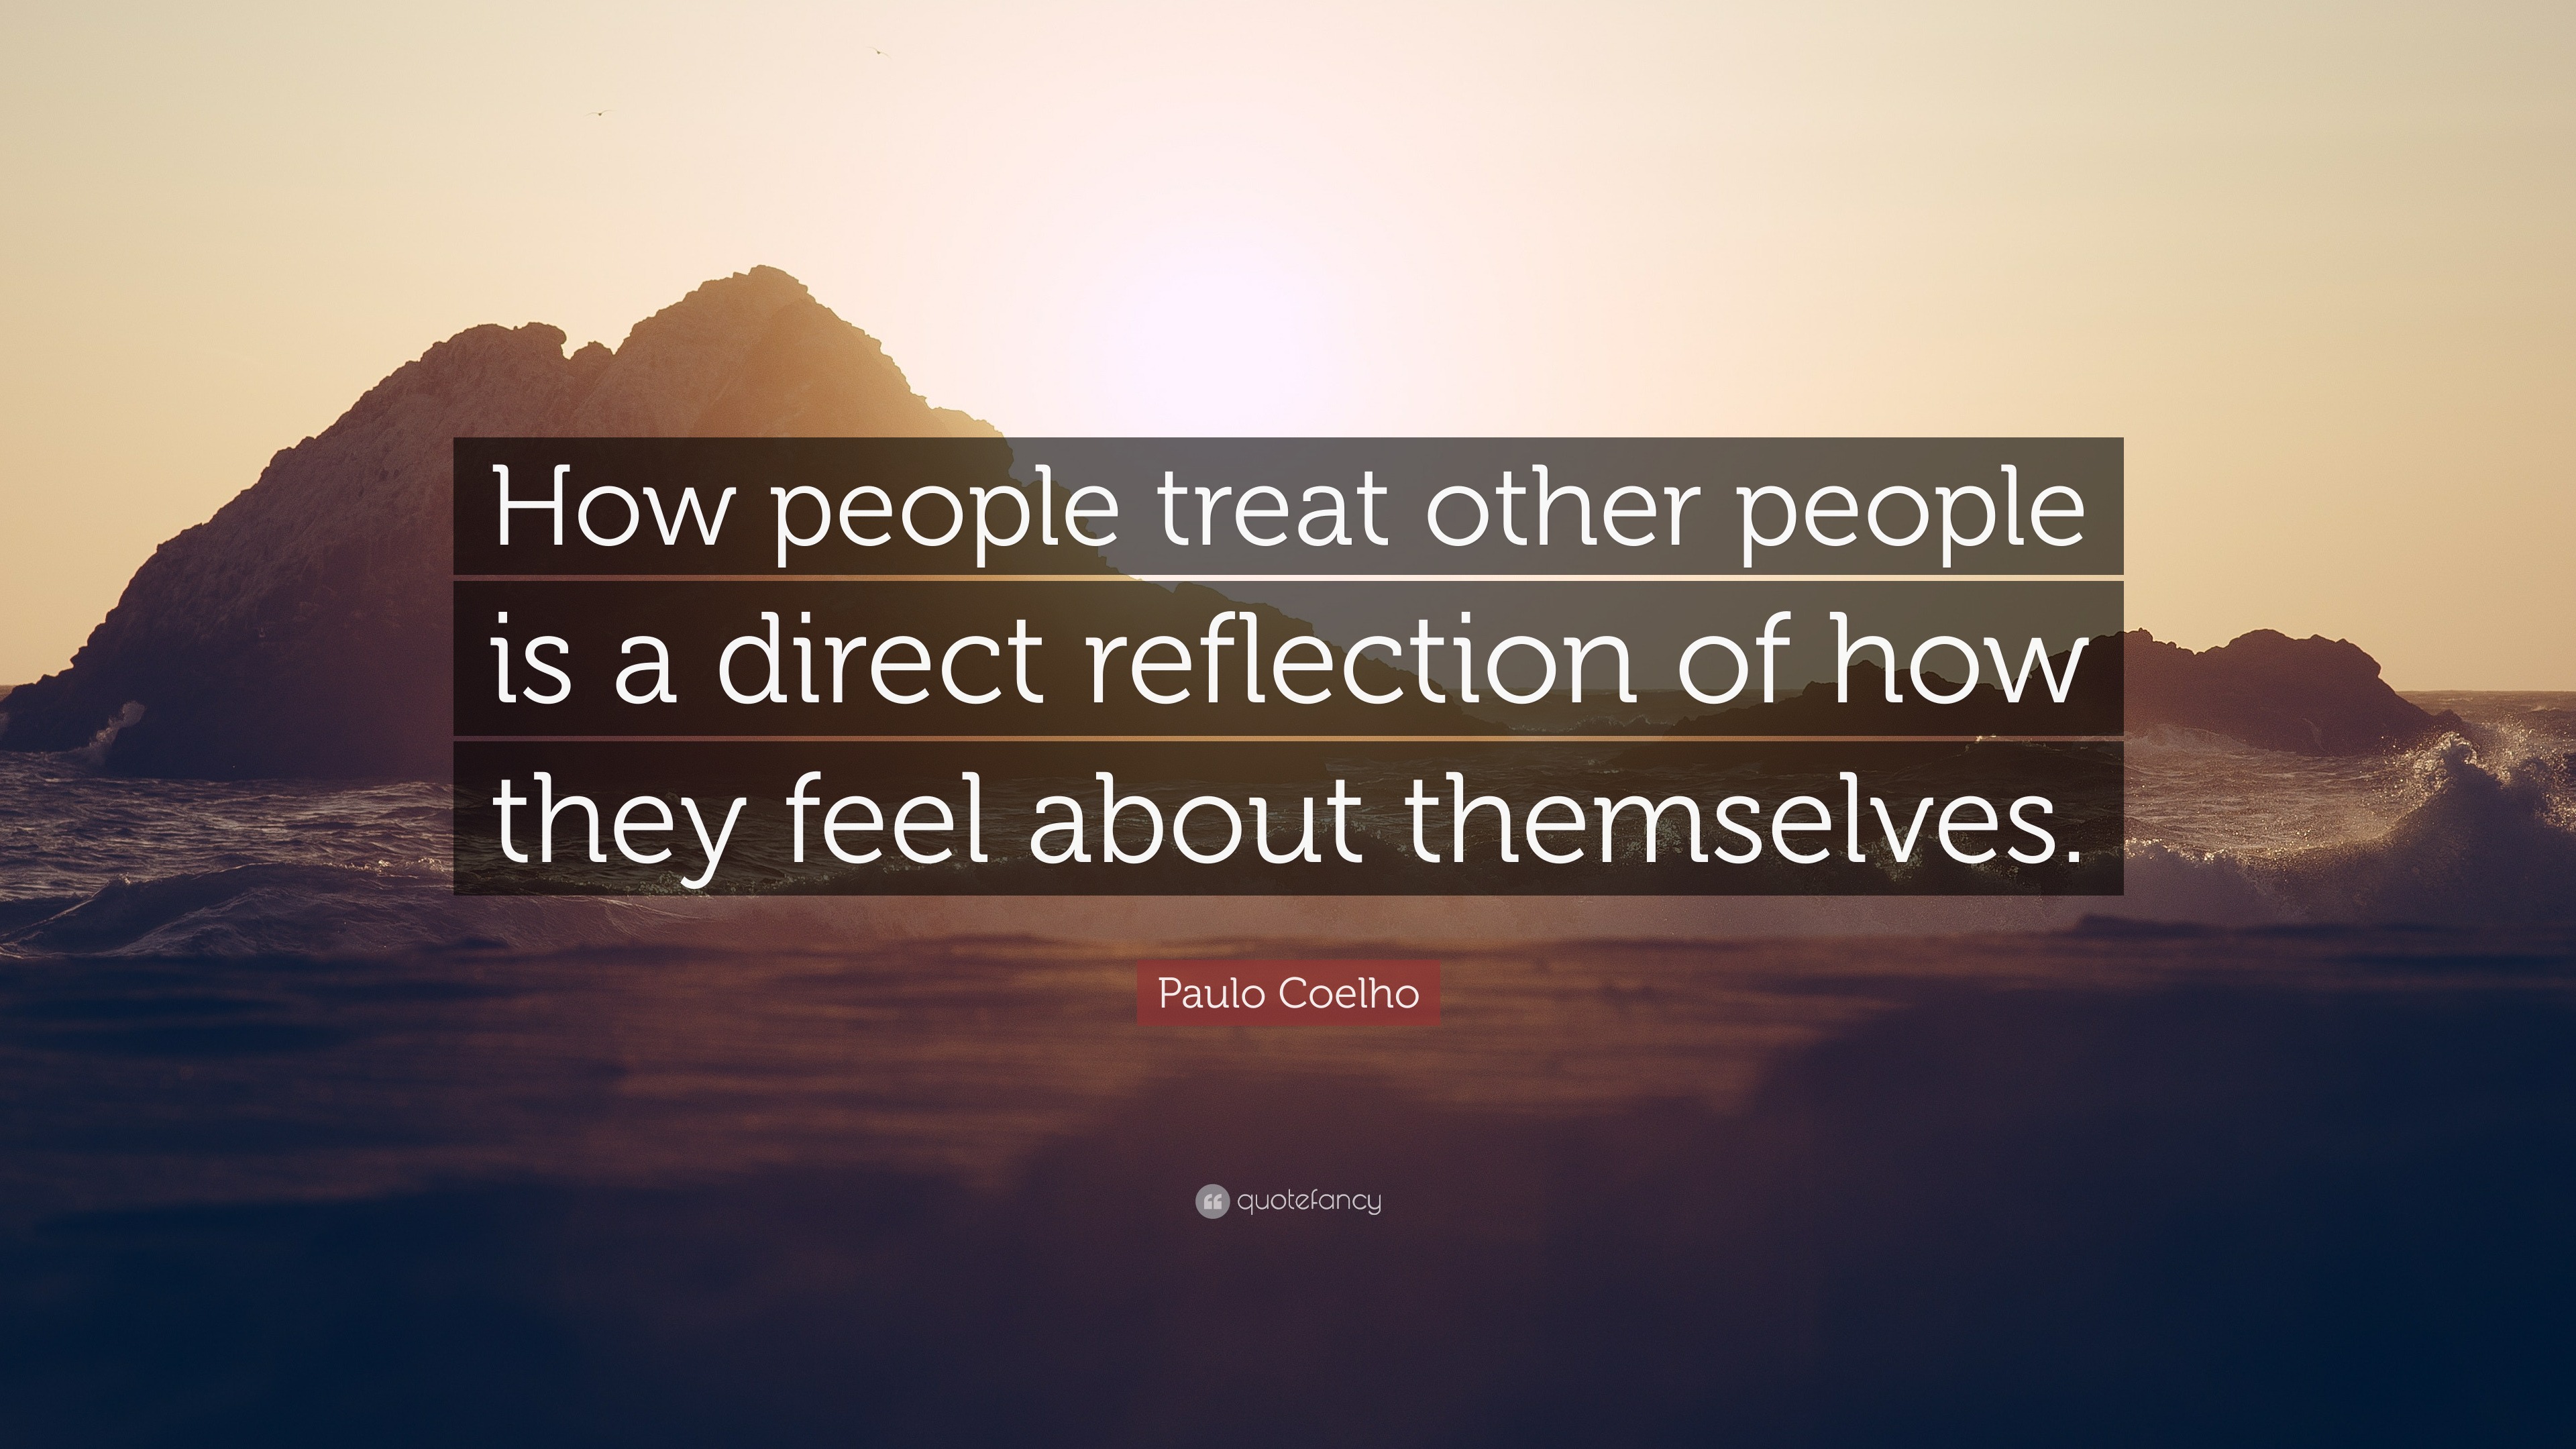 Paulo Coelho Quote: "How people treat other people is a direct 